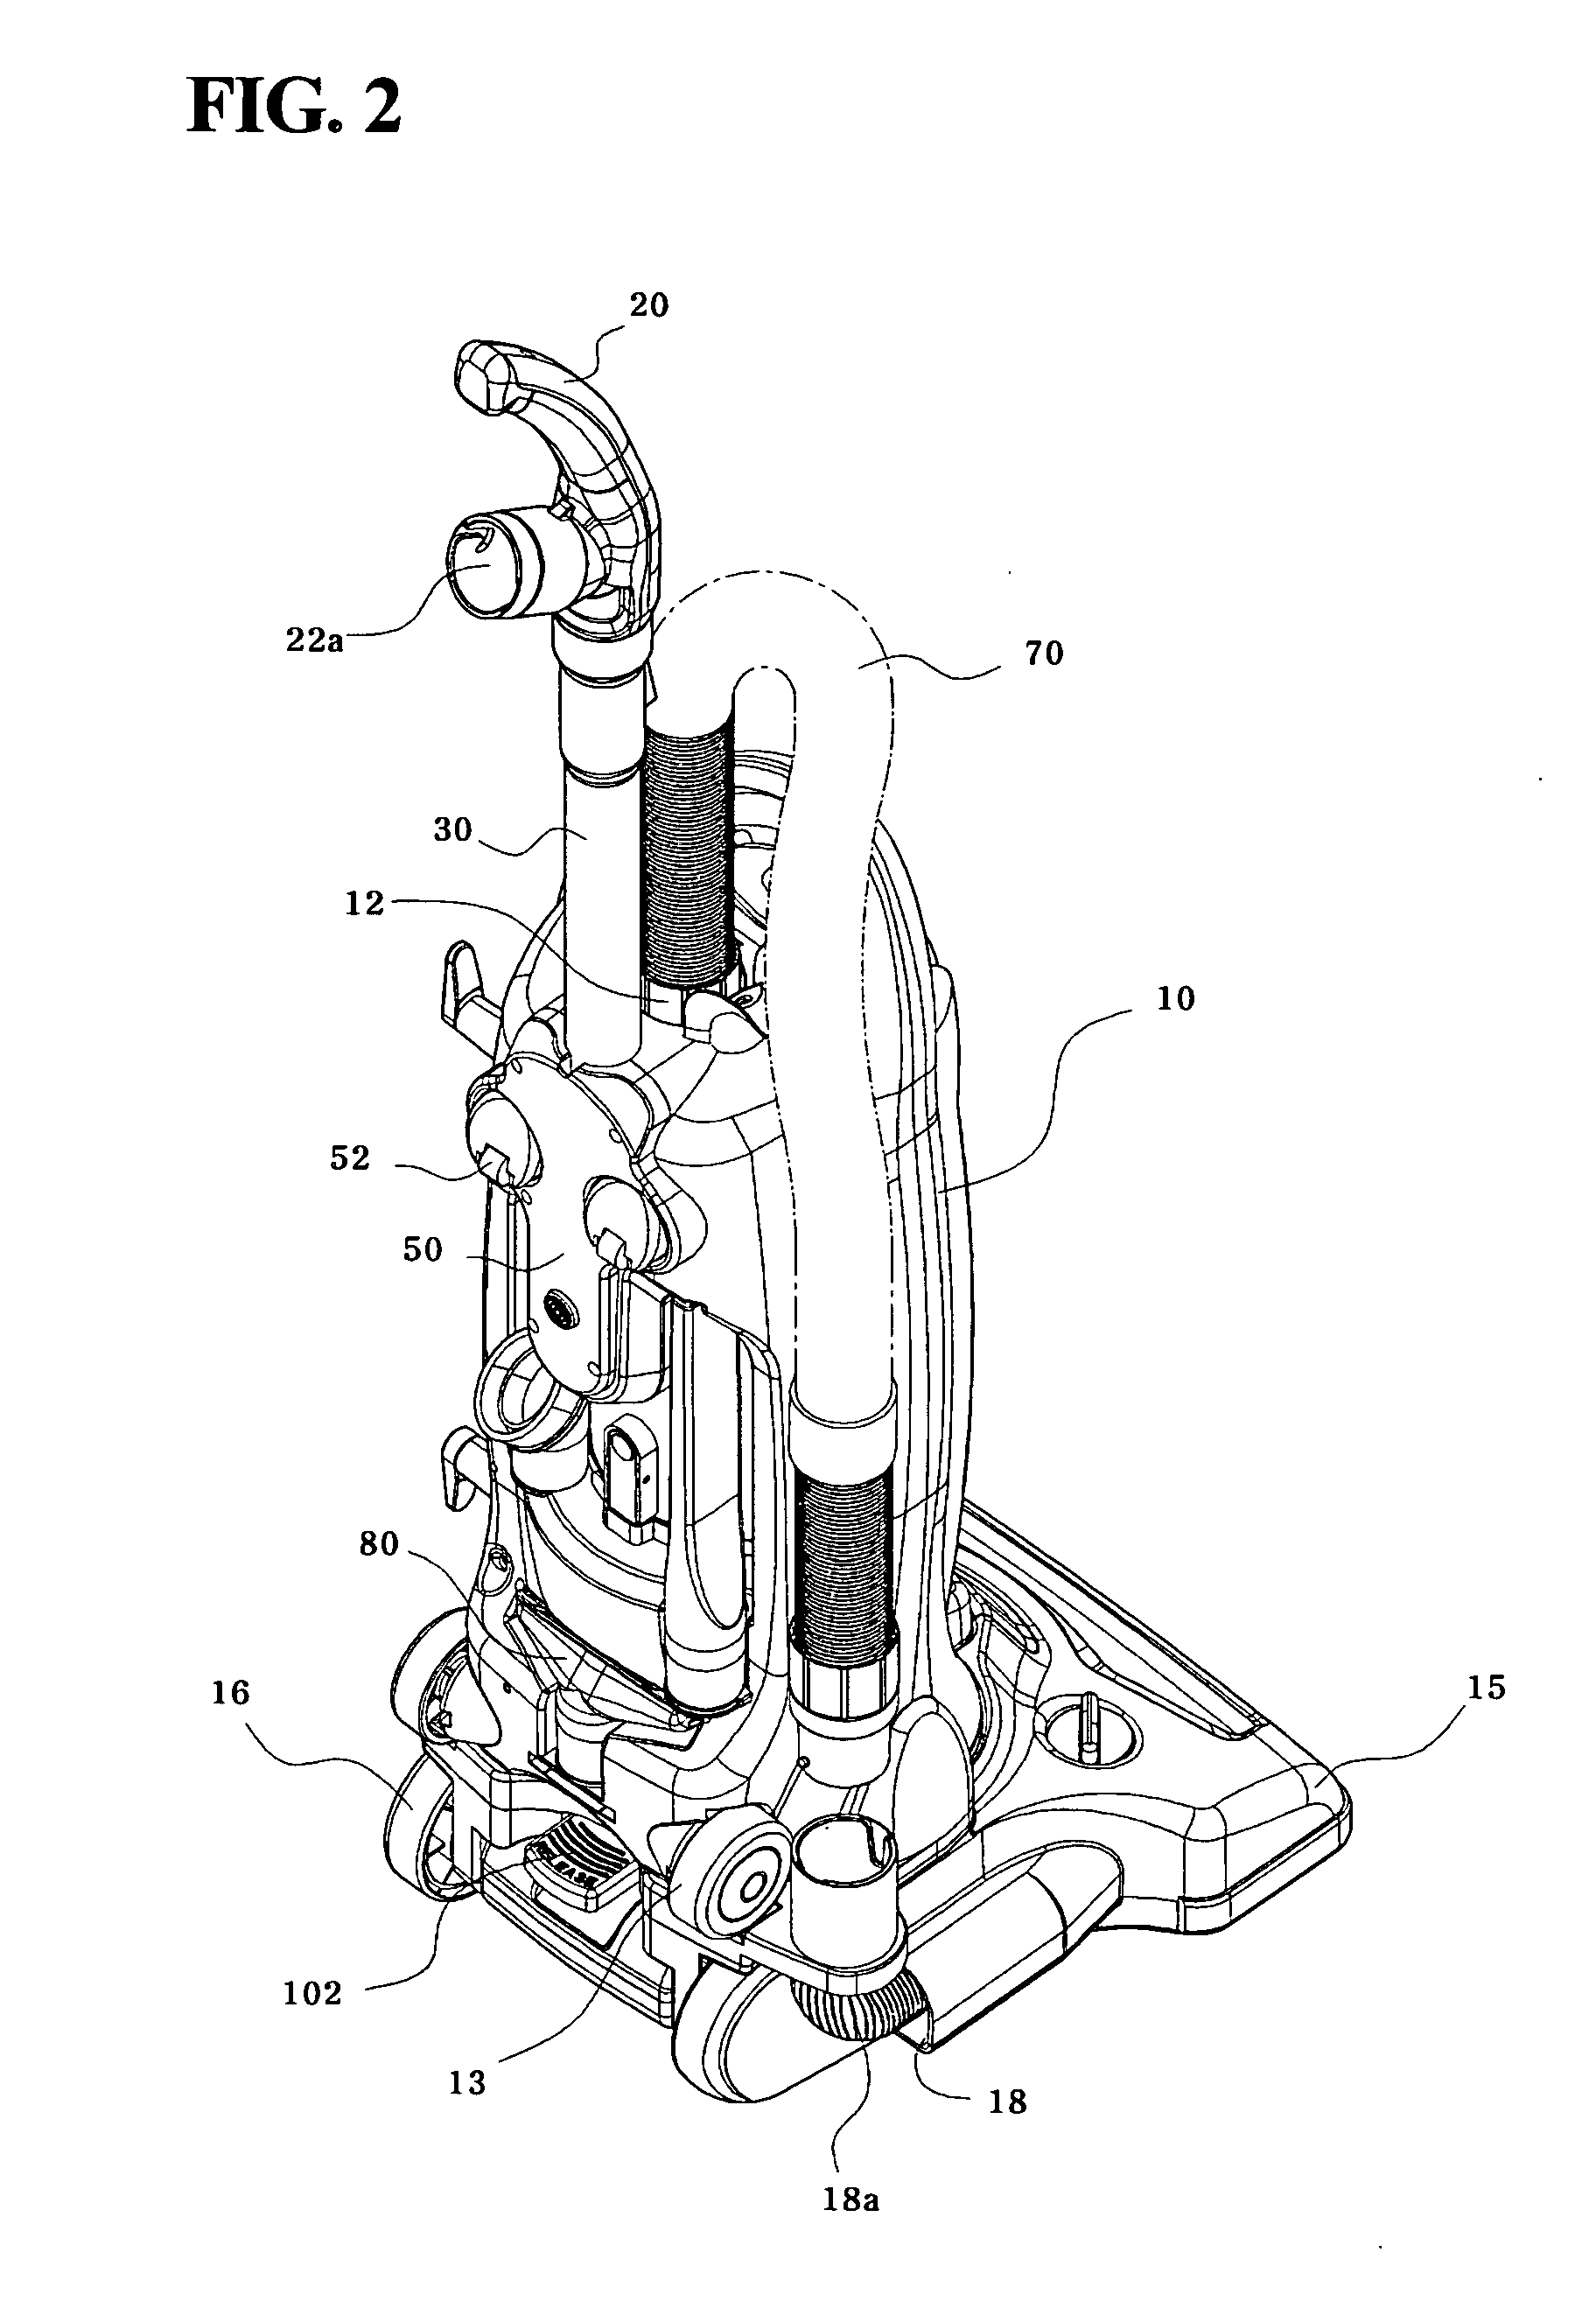 Main body mounting structure of upright type vacuum cleaner capable of being converted to canister type